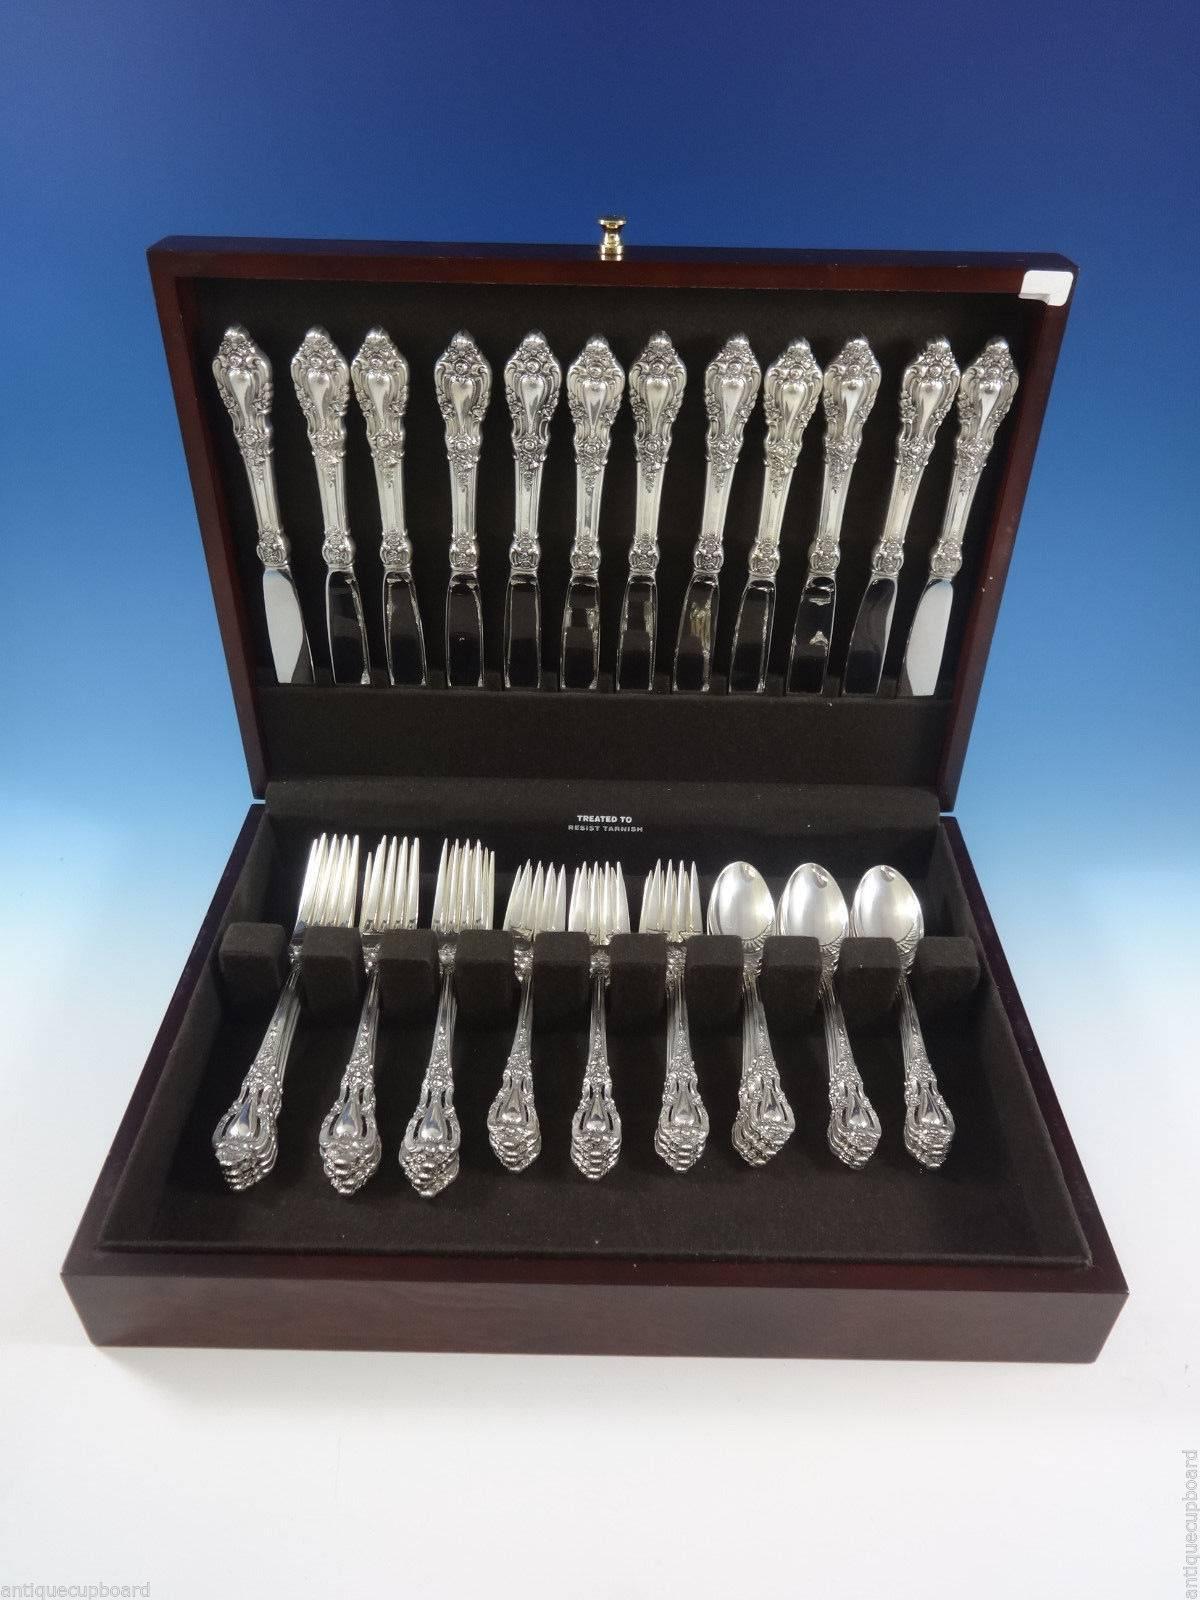 Eloquence by Lunt sterling silver flatware Service for 12-48 piece set, in excellent condition. This set includes: 

12 knives, 9 1/8